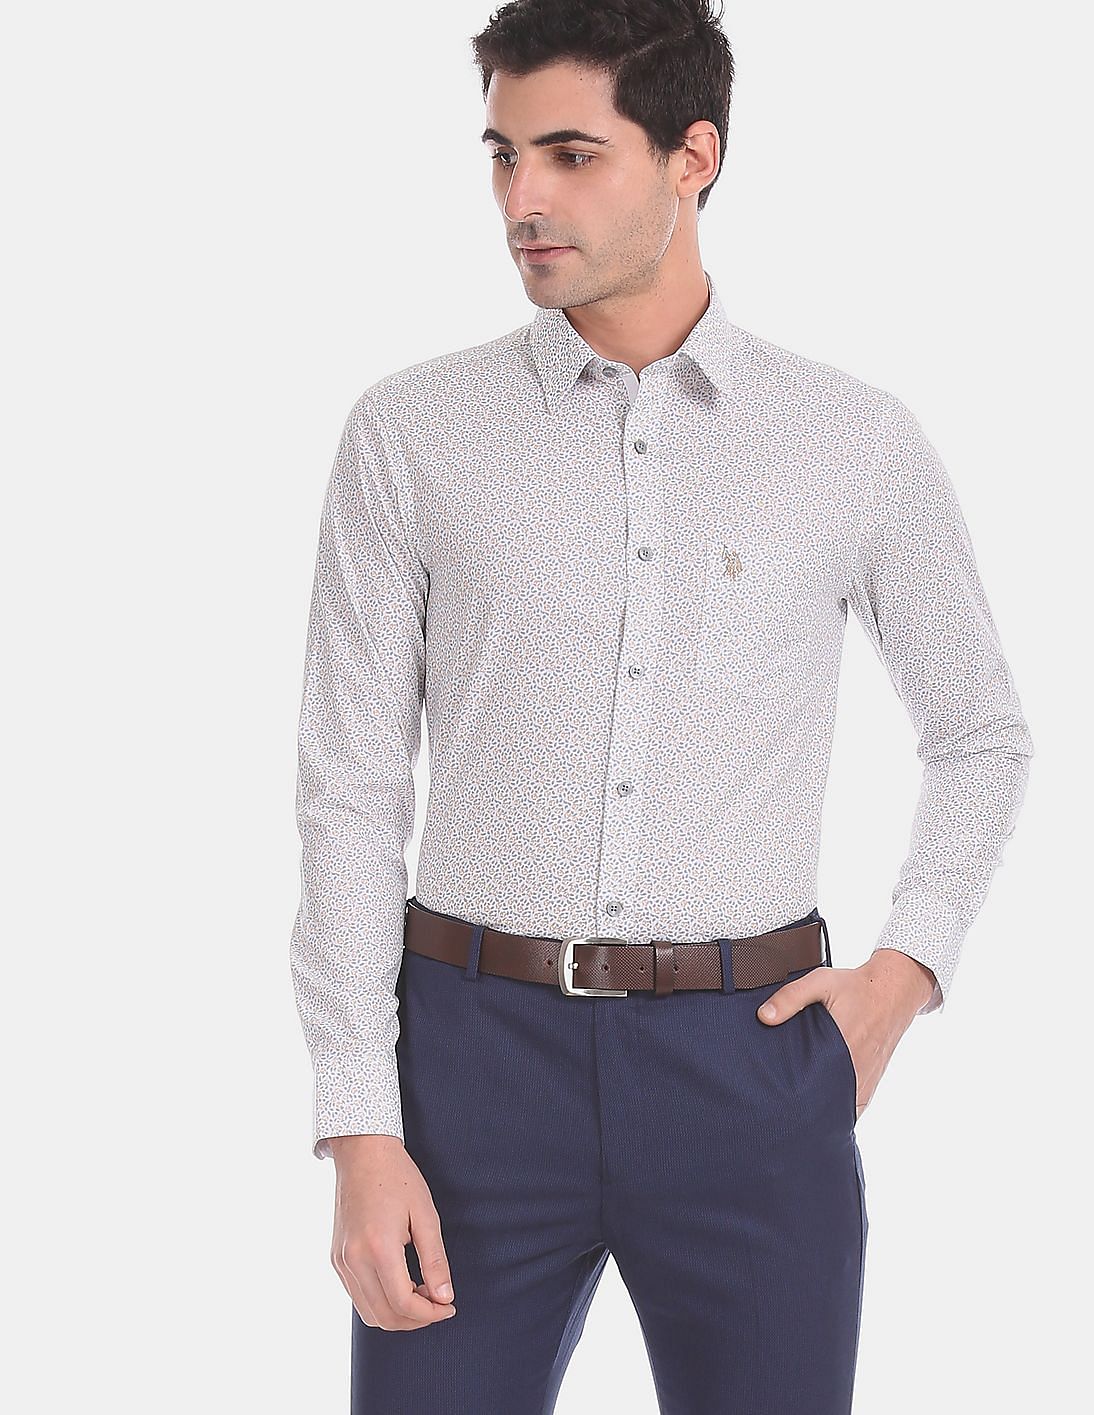 Buy USPA Tailored Men White All Over Print Cotton Formal Shirt - NNNOW.com